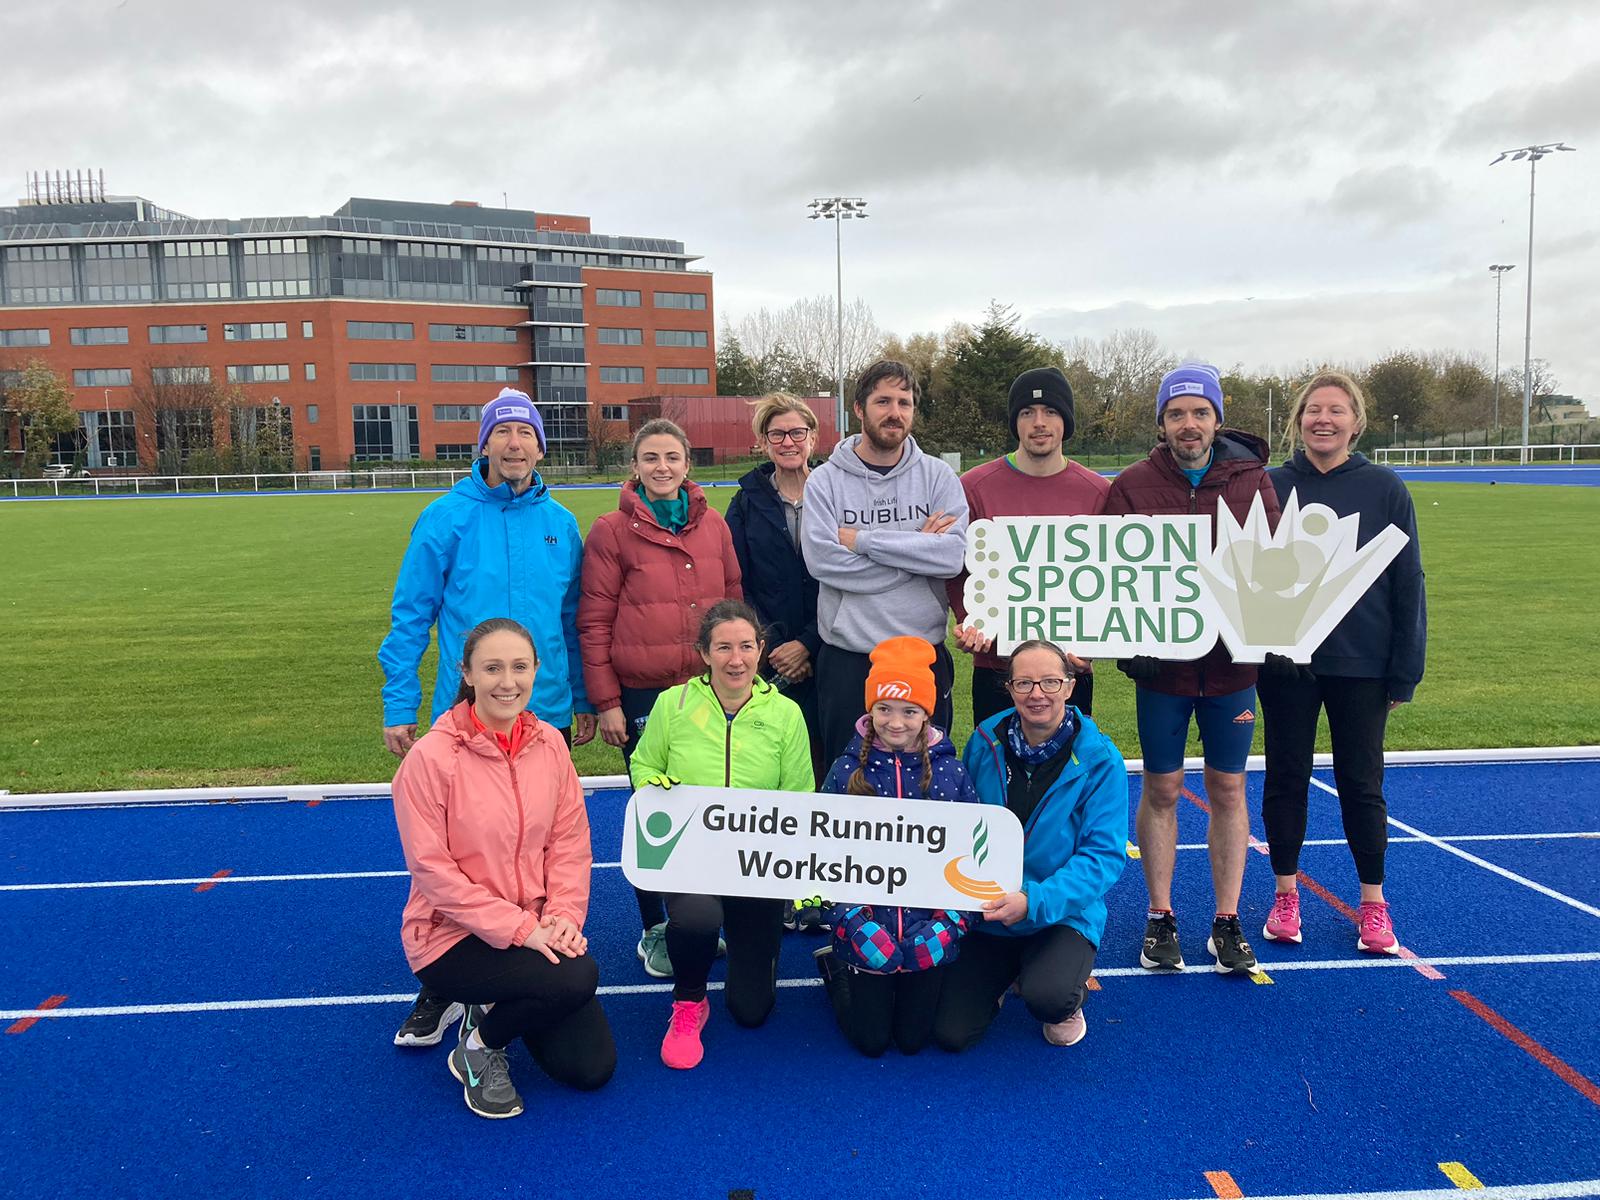 Guide Running workshop attendee's posing with Guide Running Workshop sign in UCD Athletics track.